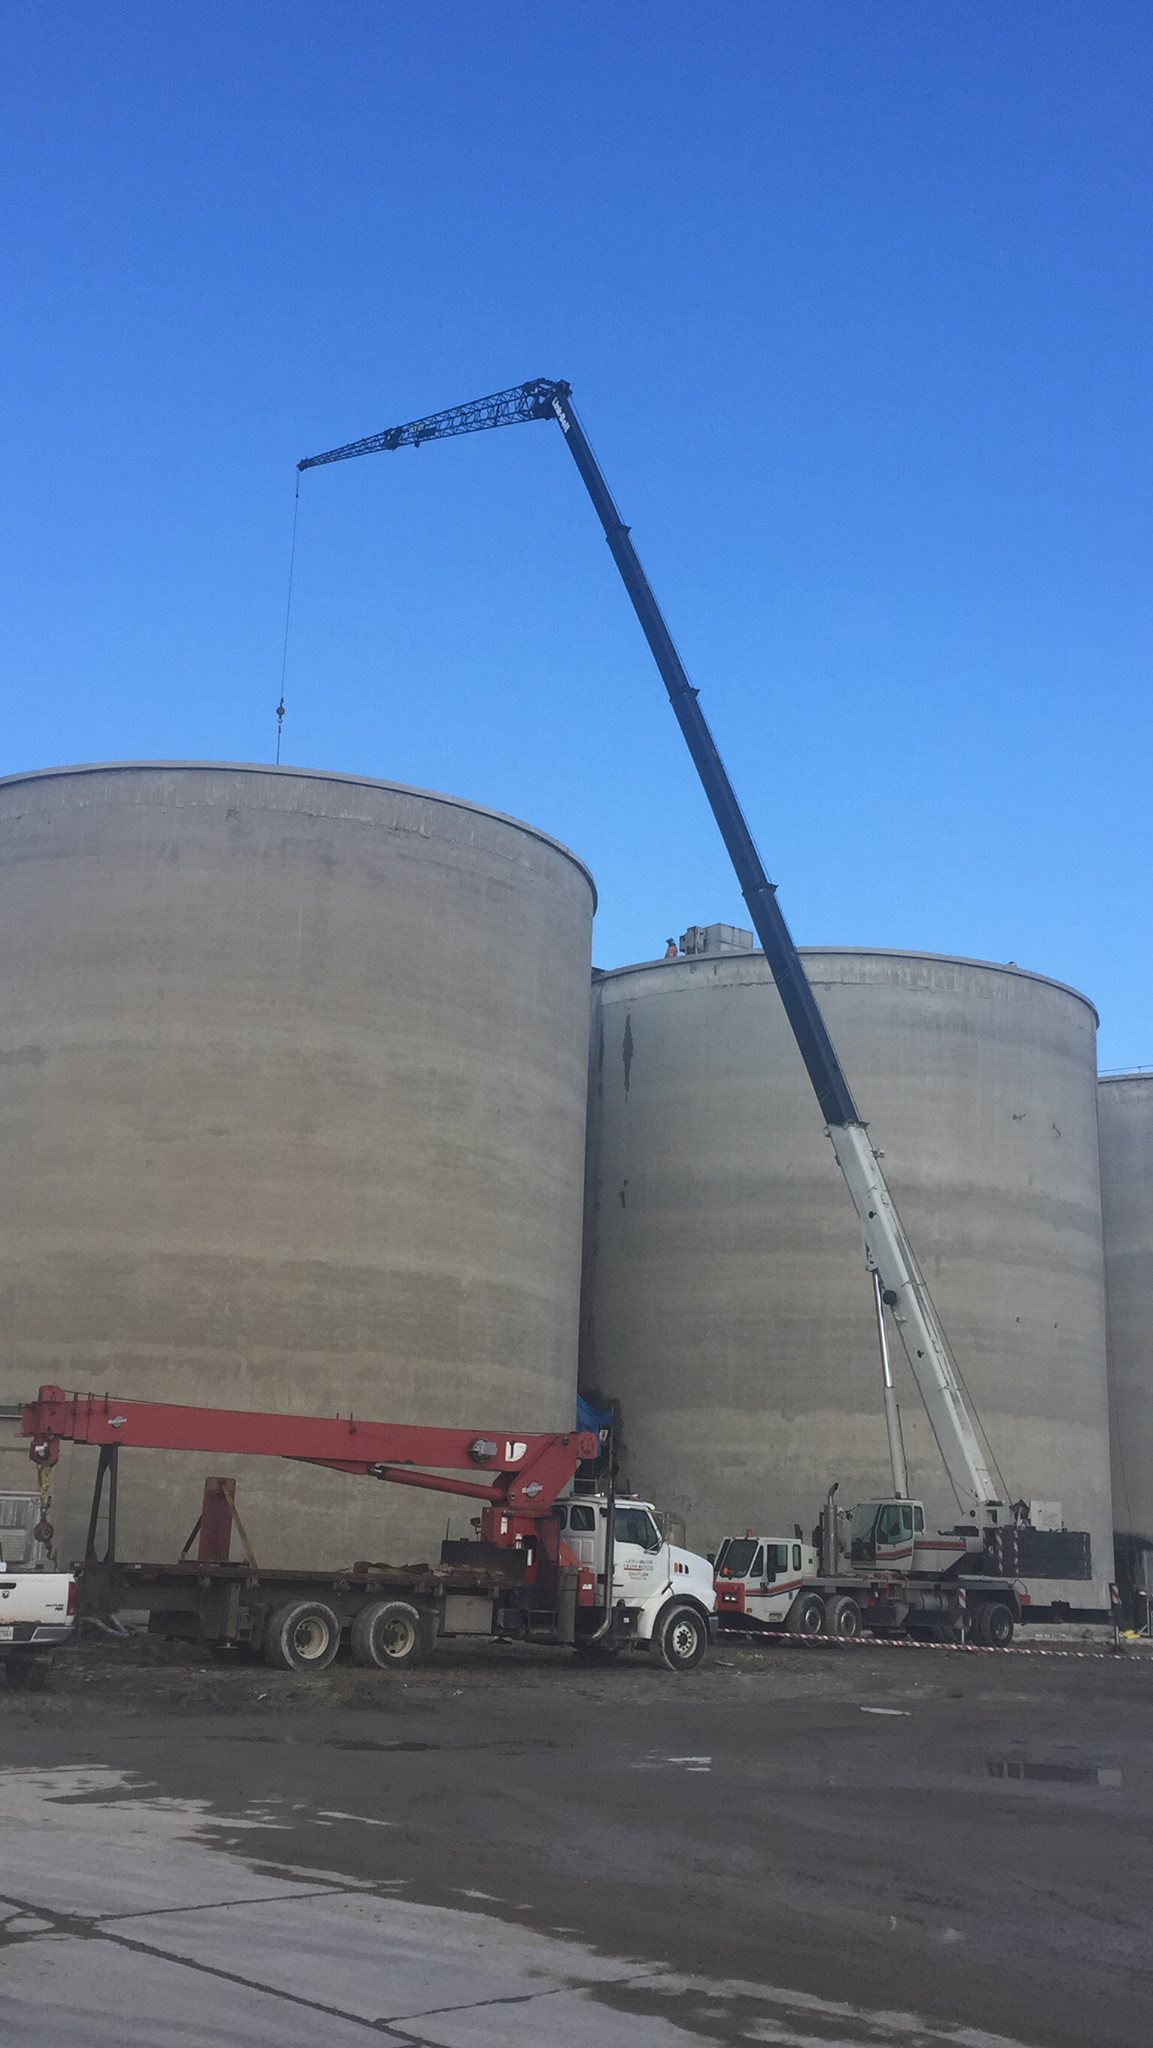 Millwright work completed by mobile crane